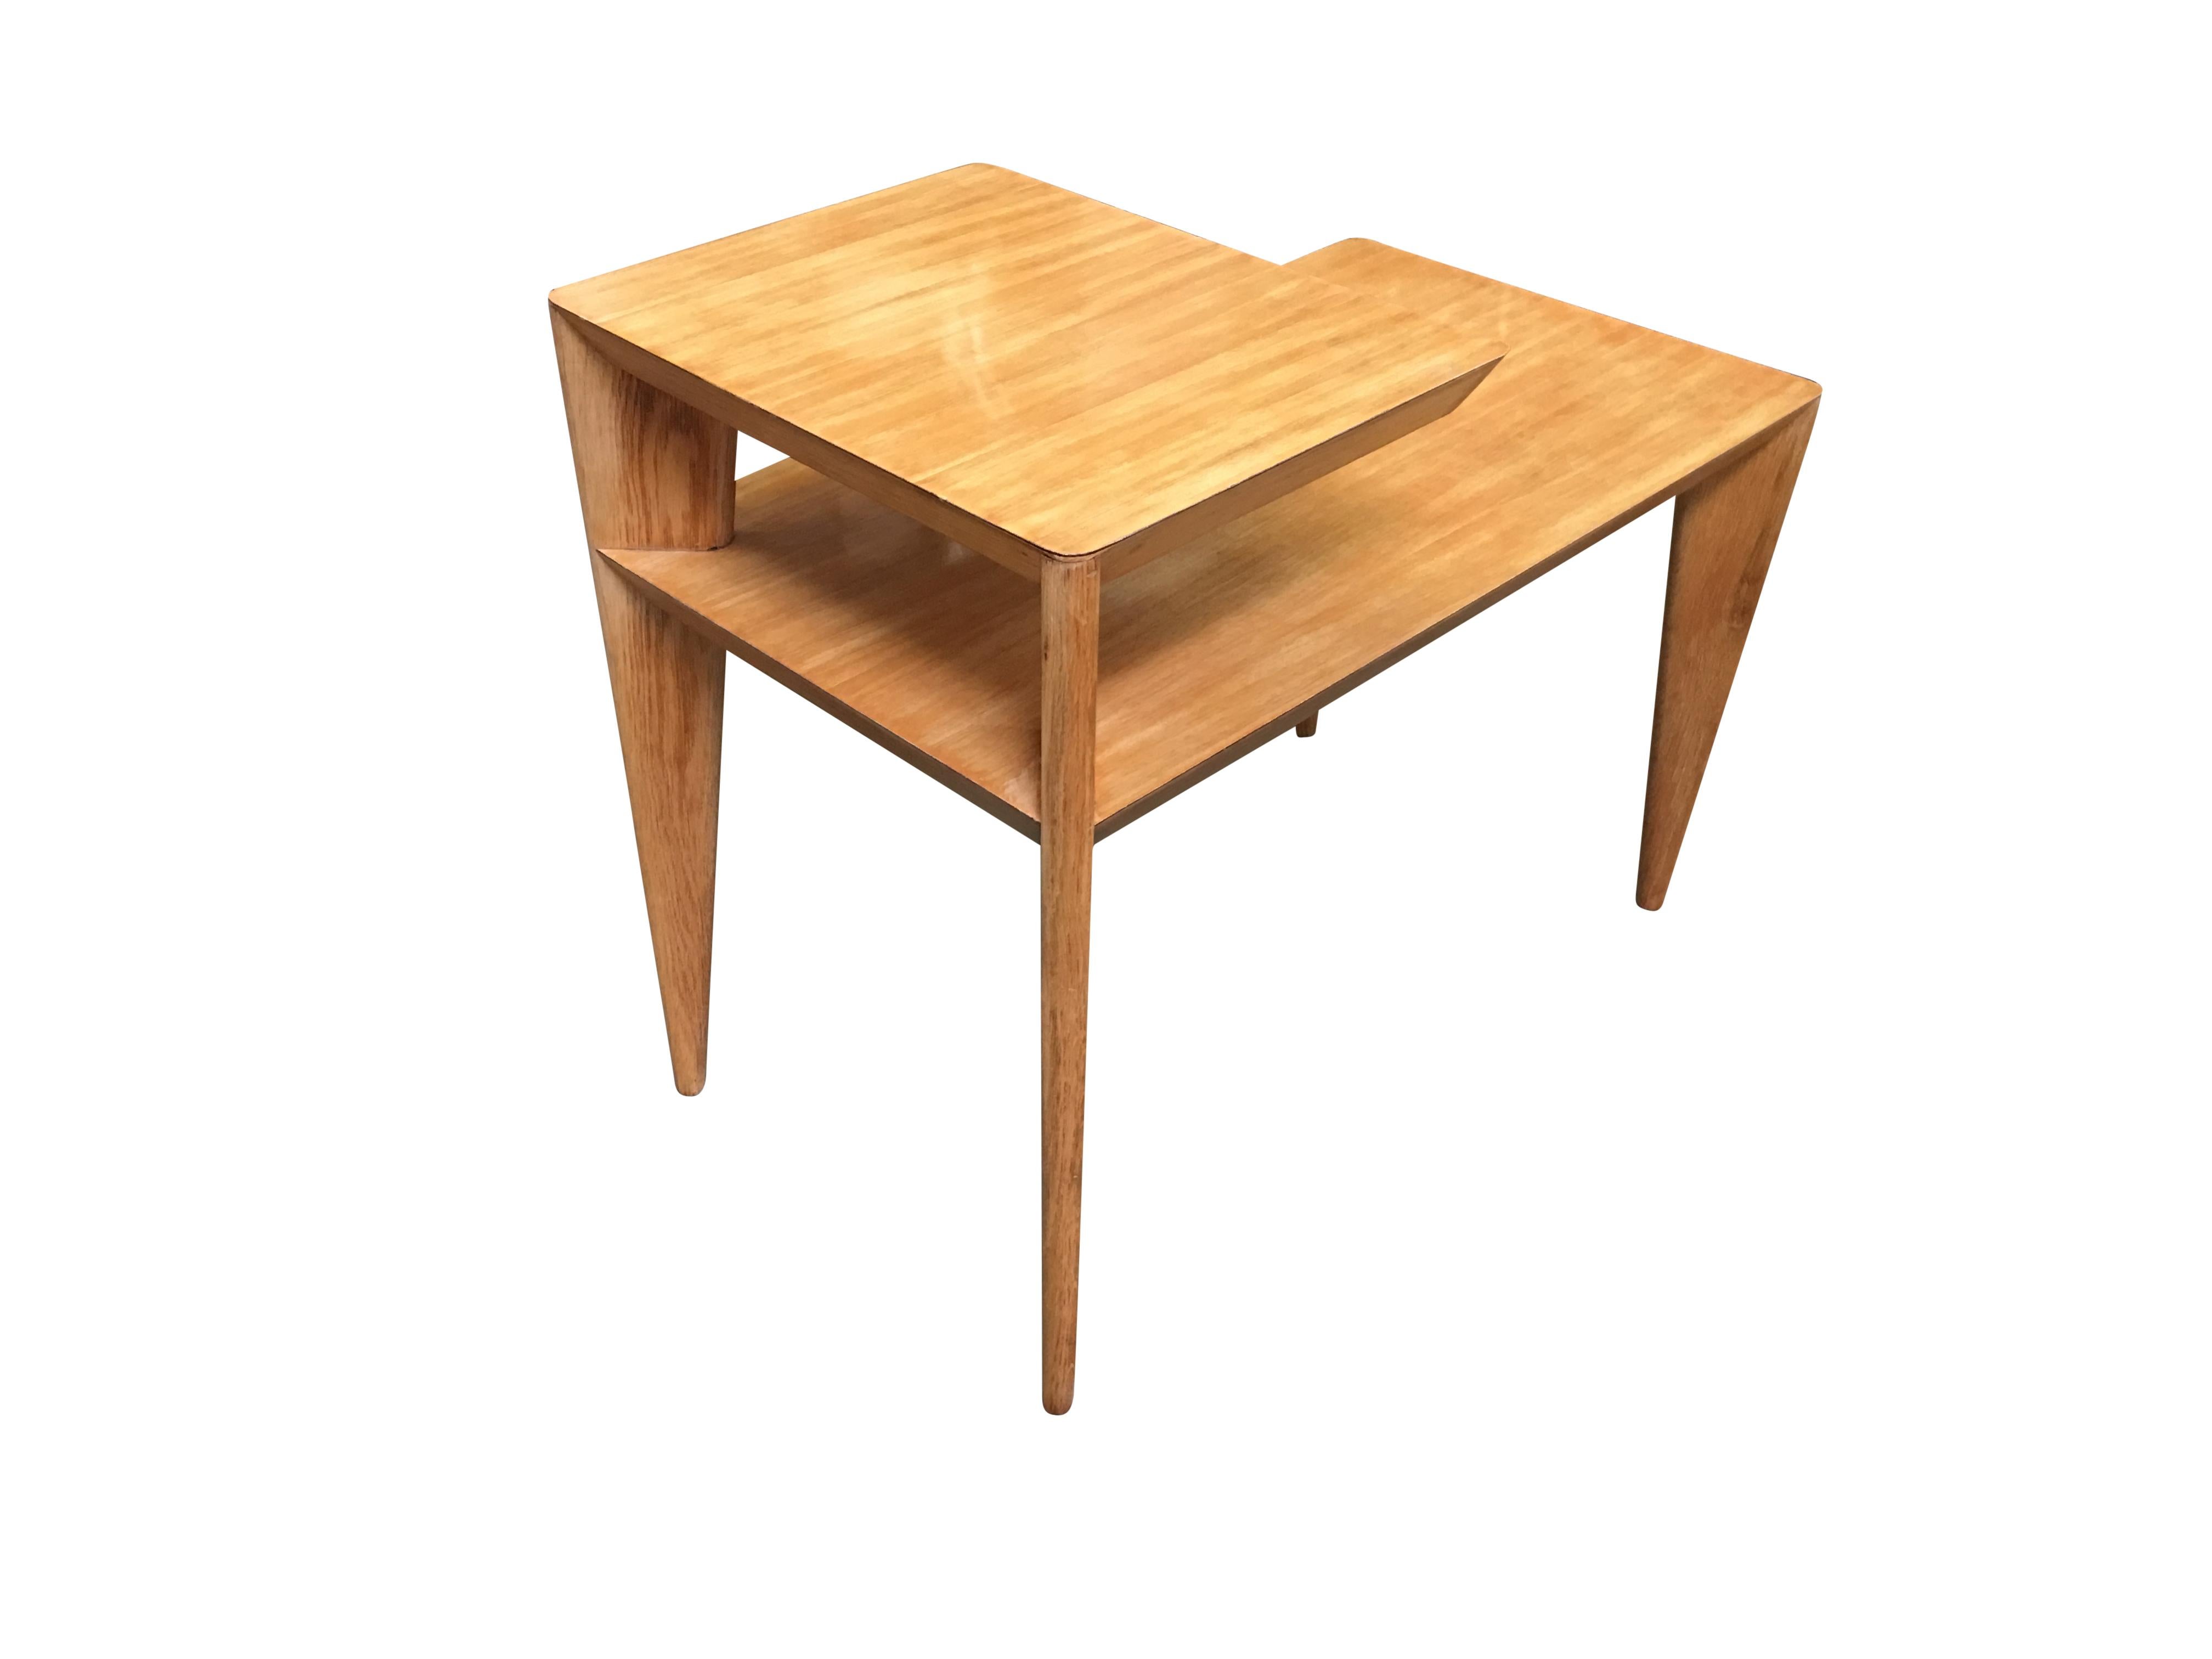 Blonde Mid Century knife leg modernist two-tier side table pair featuring a high style geometric form with pointed knife style legs and formica tops.